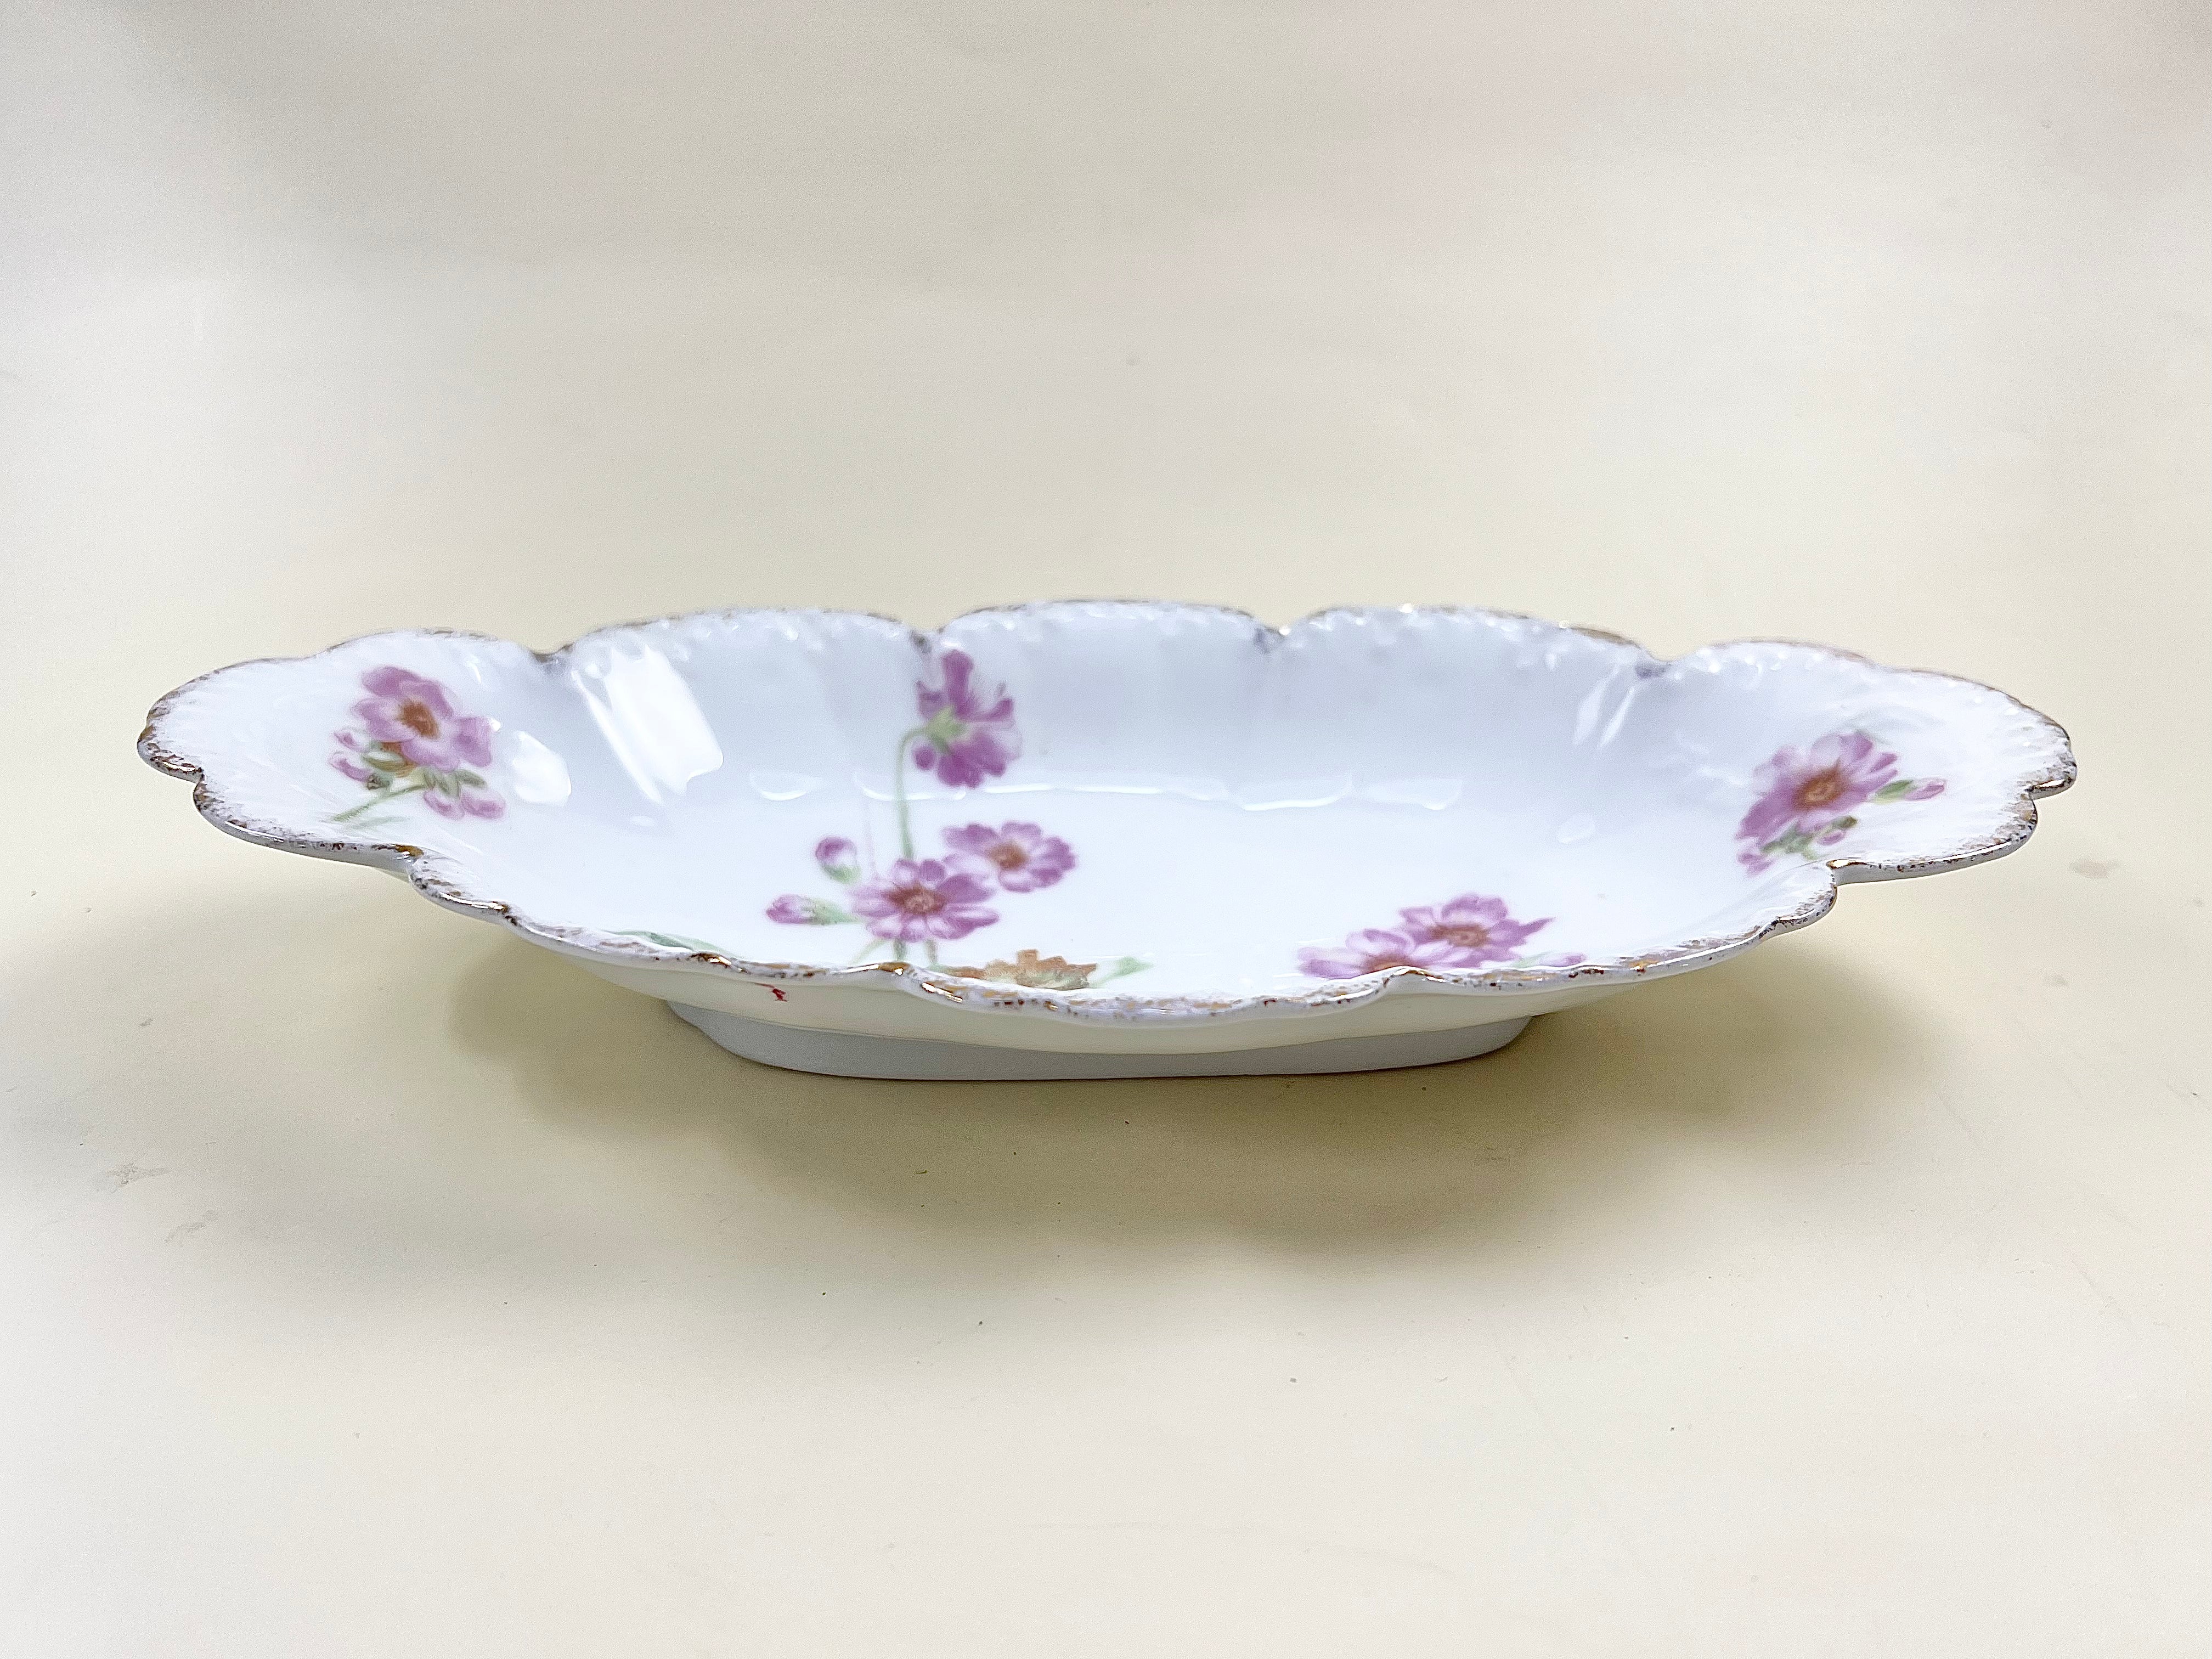 Oblong Porcelain Catchall Dish with Pink Flowers